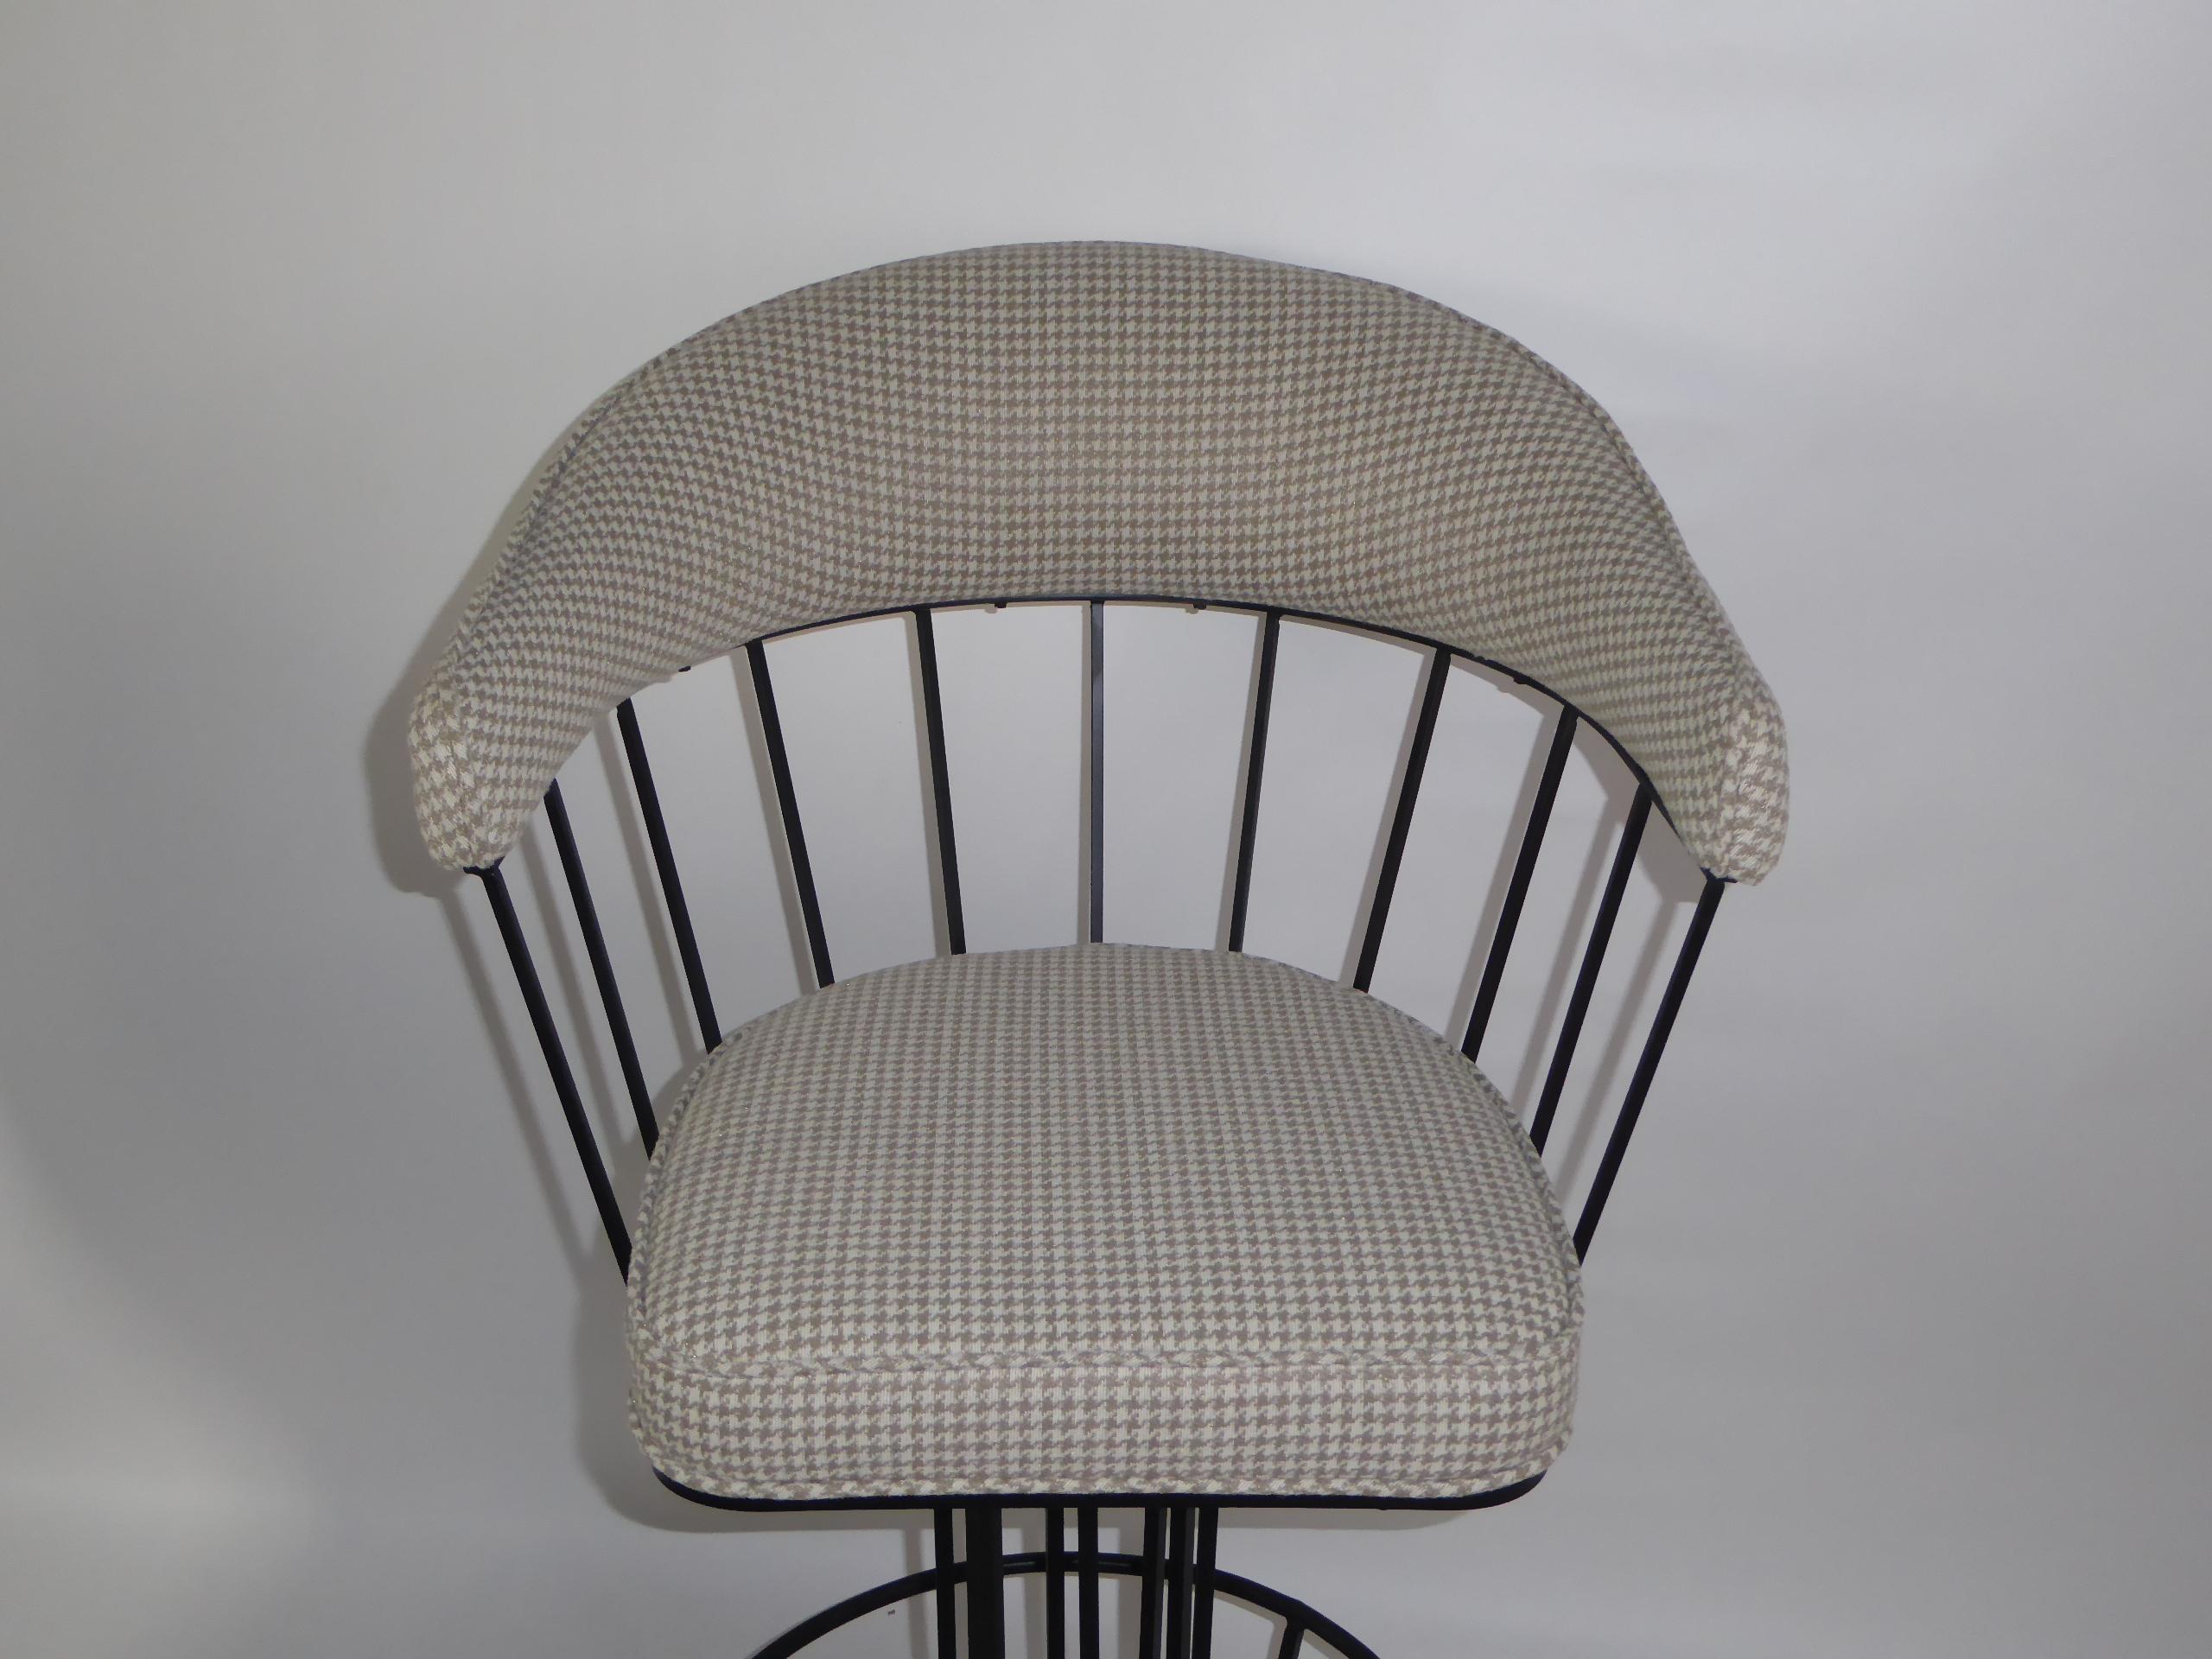 Four 1960s Swiveling Bar Stools Upholstered in Houndstooth Anton Lorenz Inspired 1